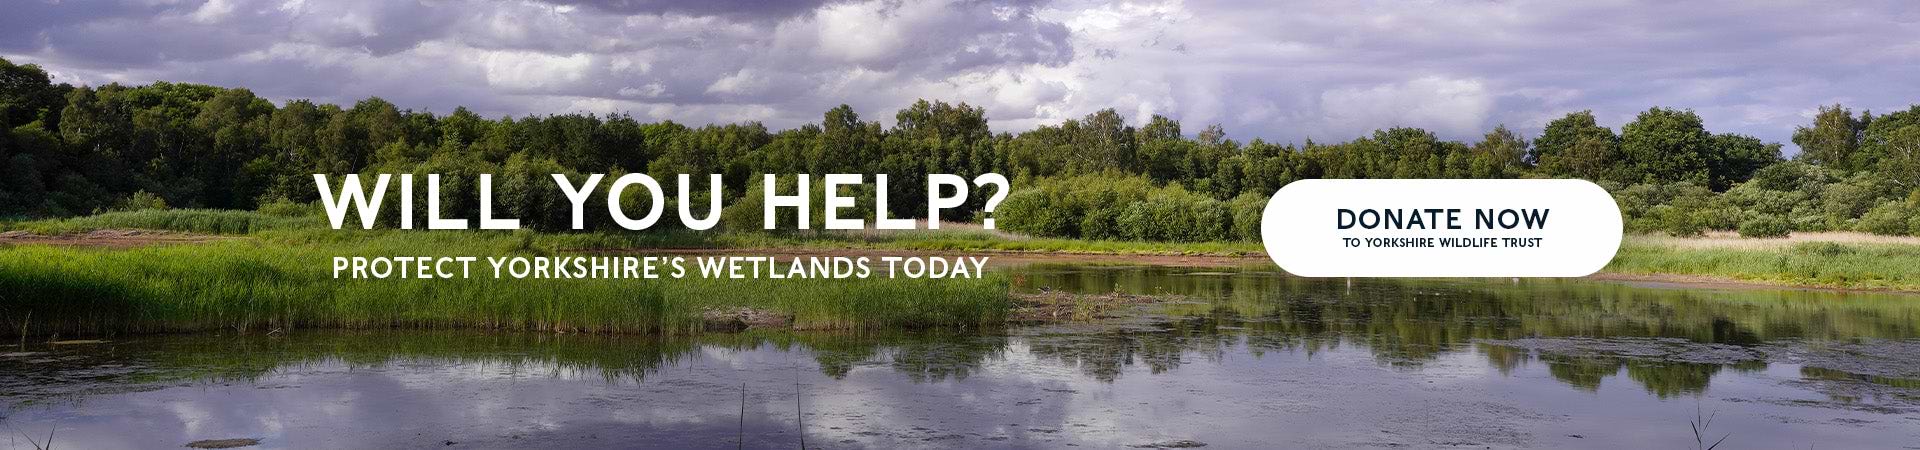 Will you help? Protect Yorkshire's wetlands today. Donate to Yorkshire Wildlife Trust